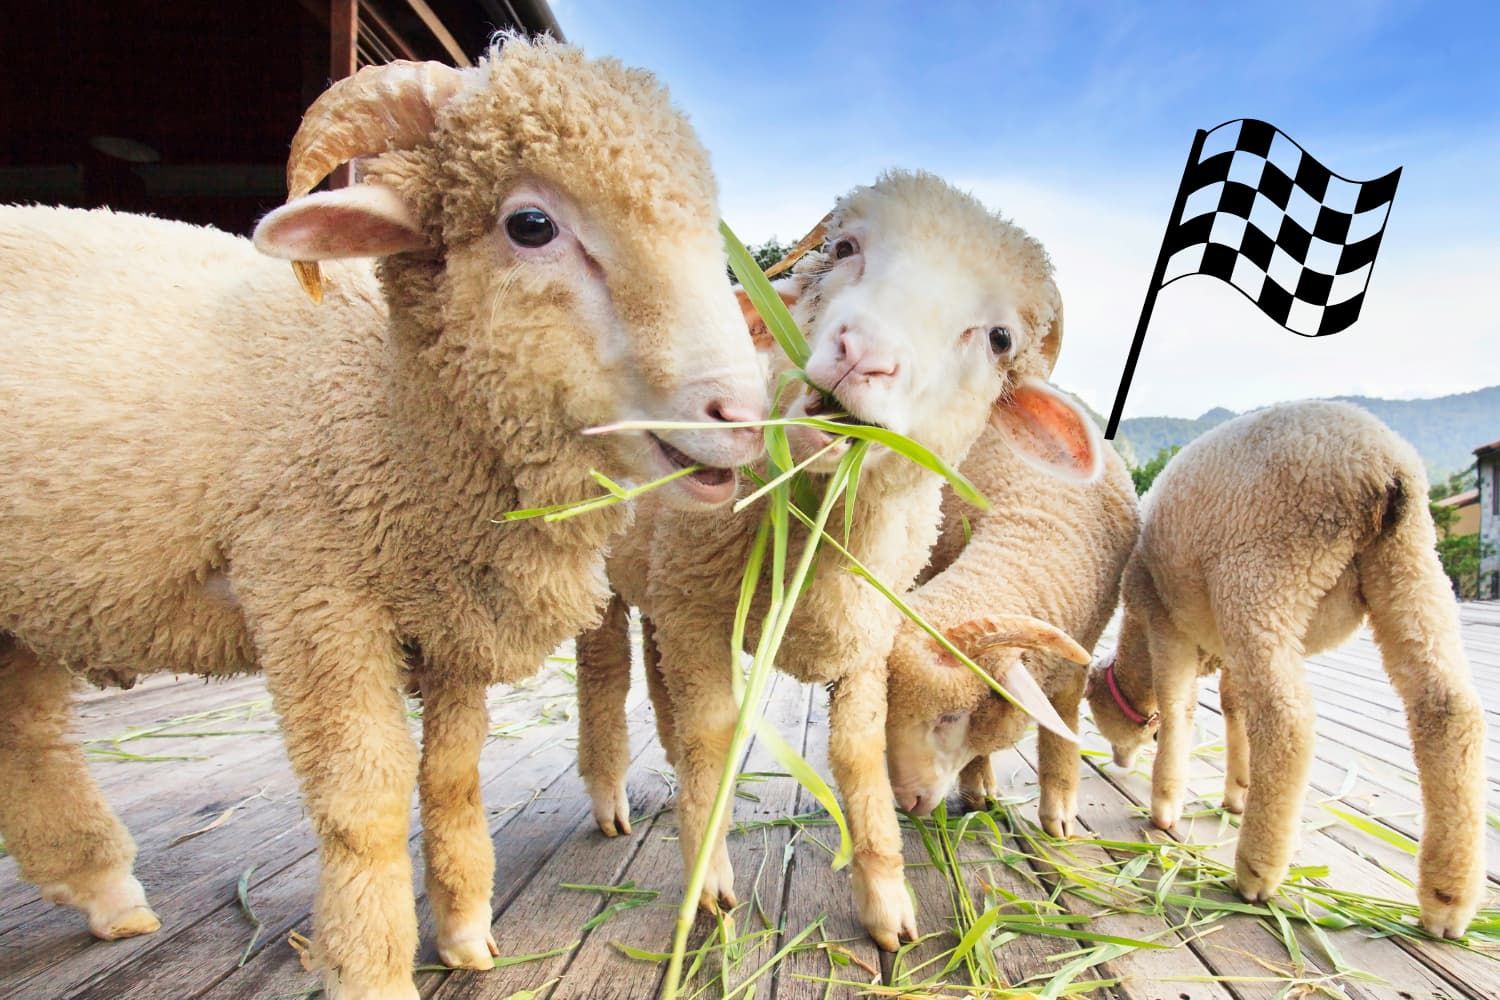 Game%20-%20OT%20Psalm%2023%20-%20The%20feed%20the%20sheep%20relay%20race-6bb58723 Enemy / enmity